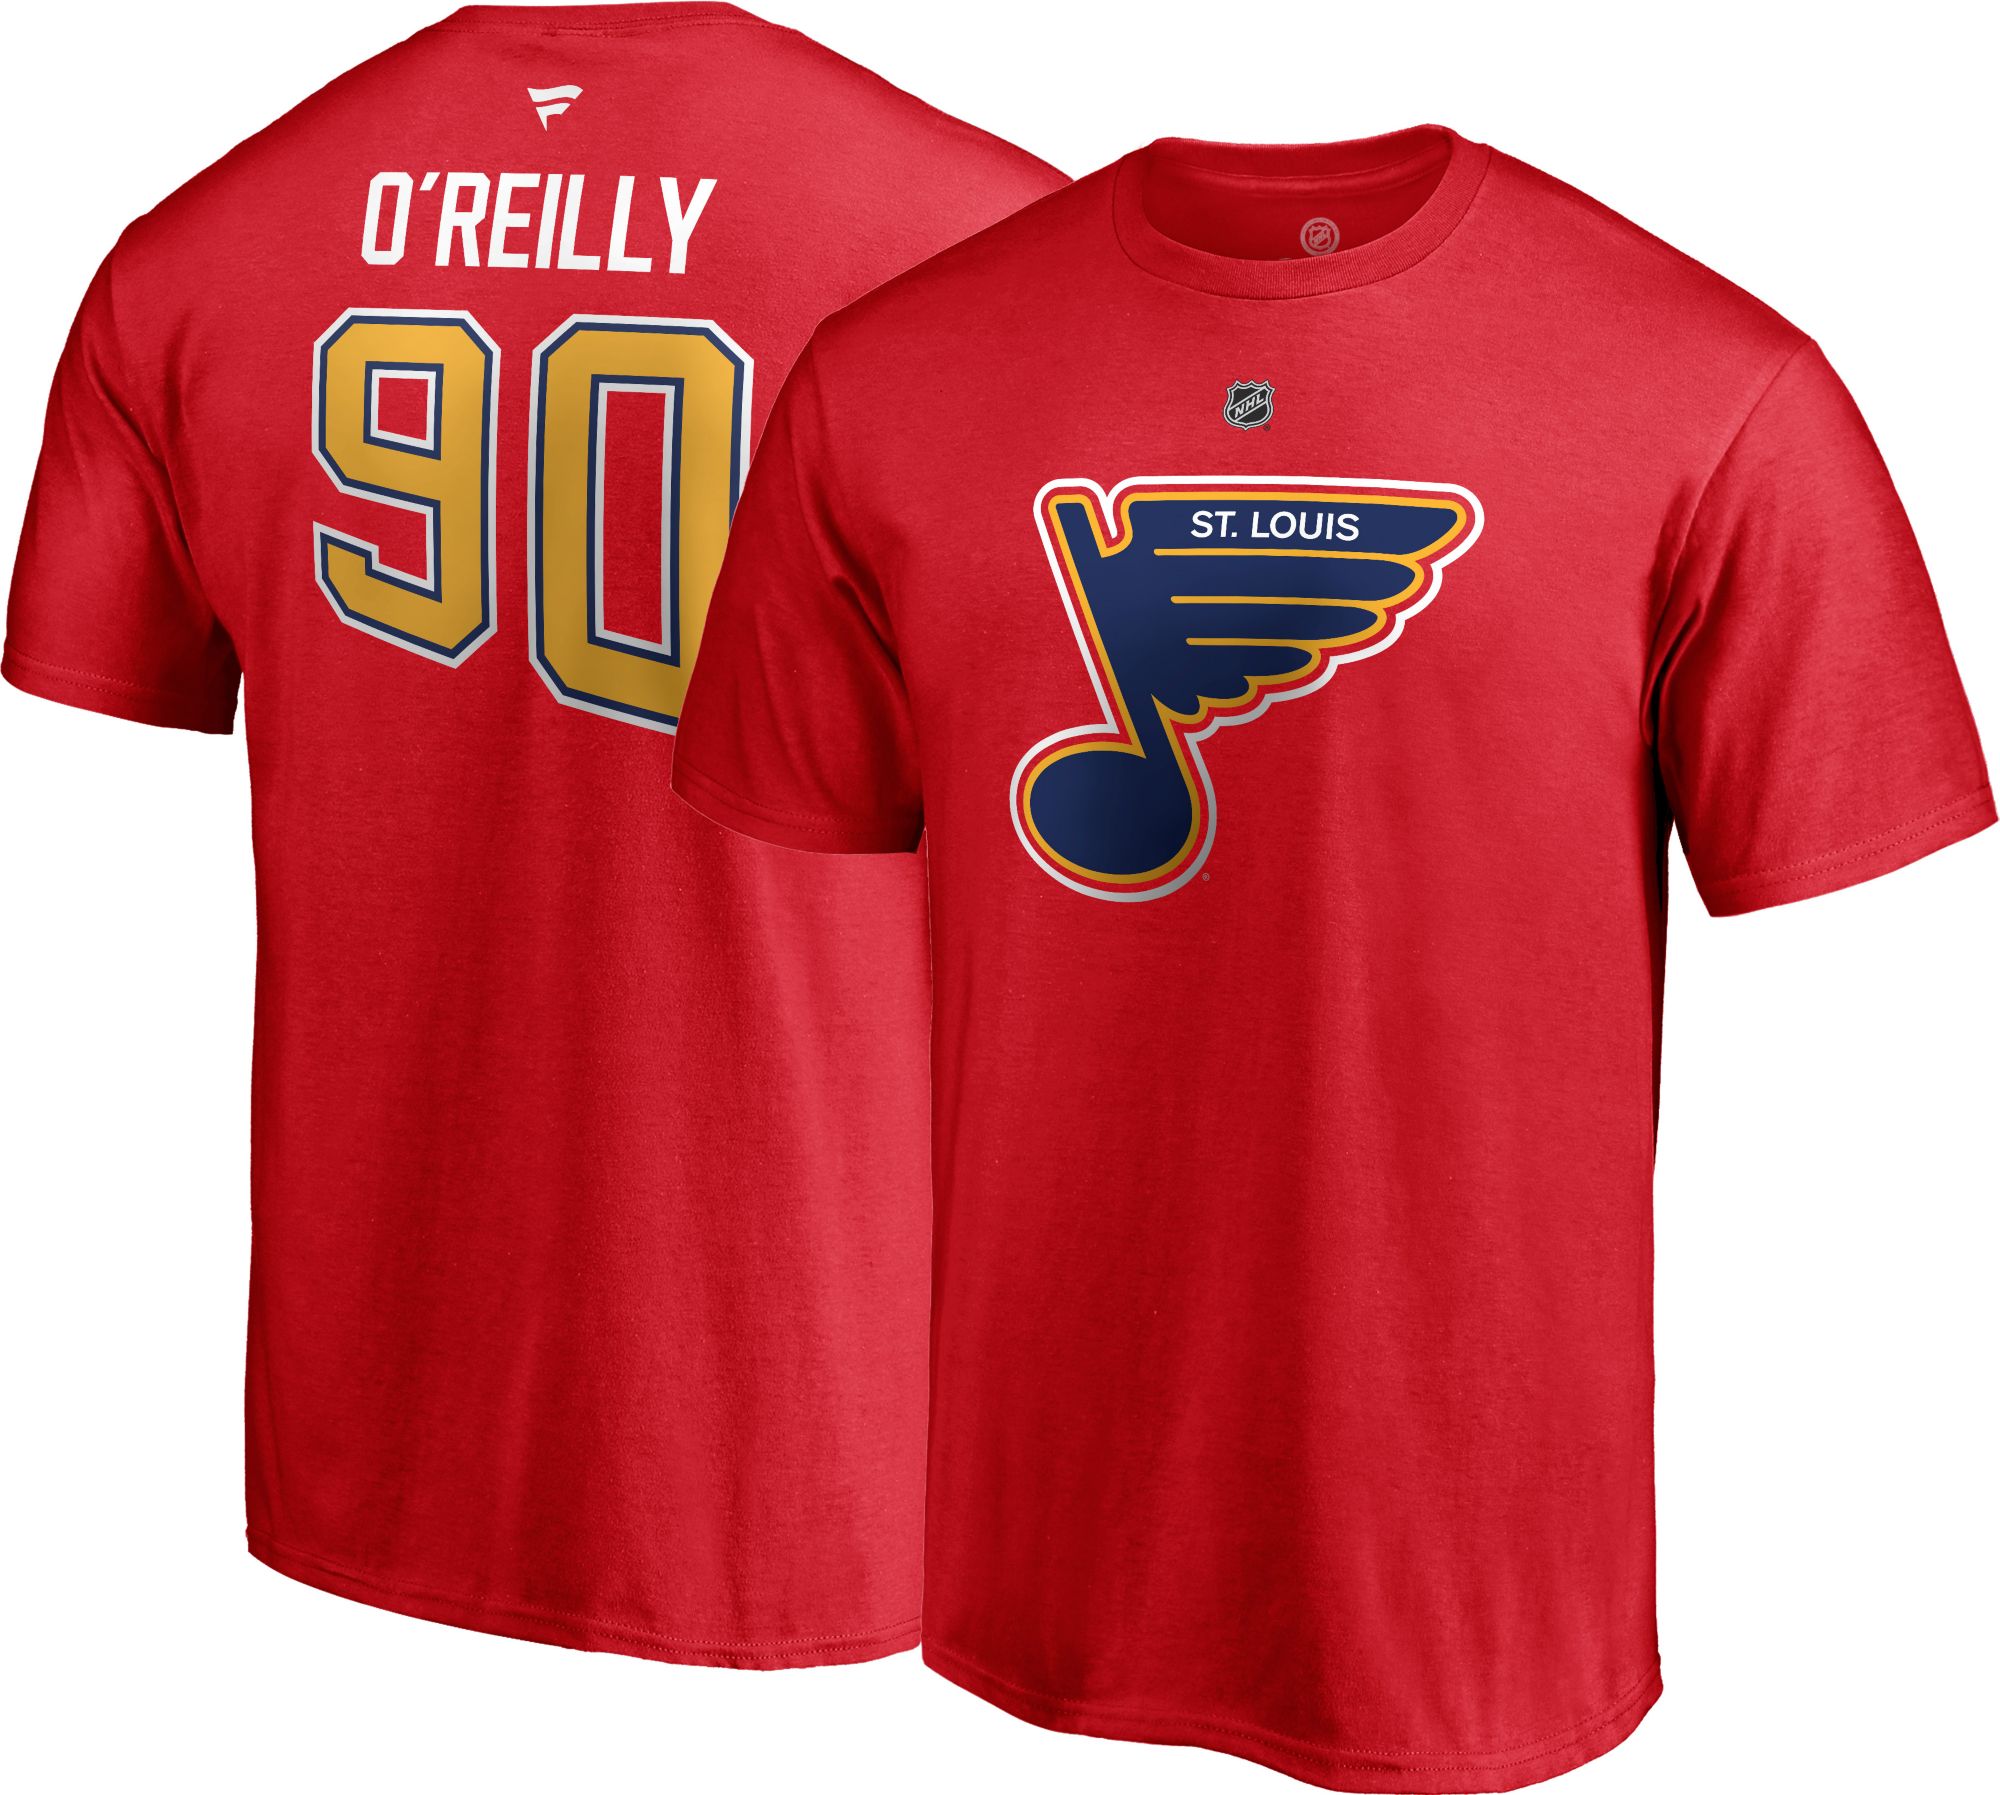 St. Louis Blues Replica Home Jersey - Ryan O Reilly - Youth